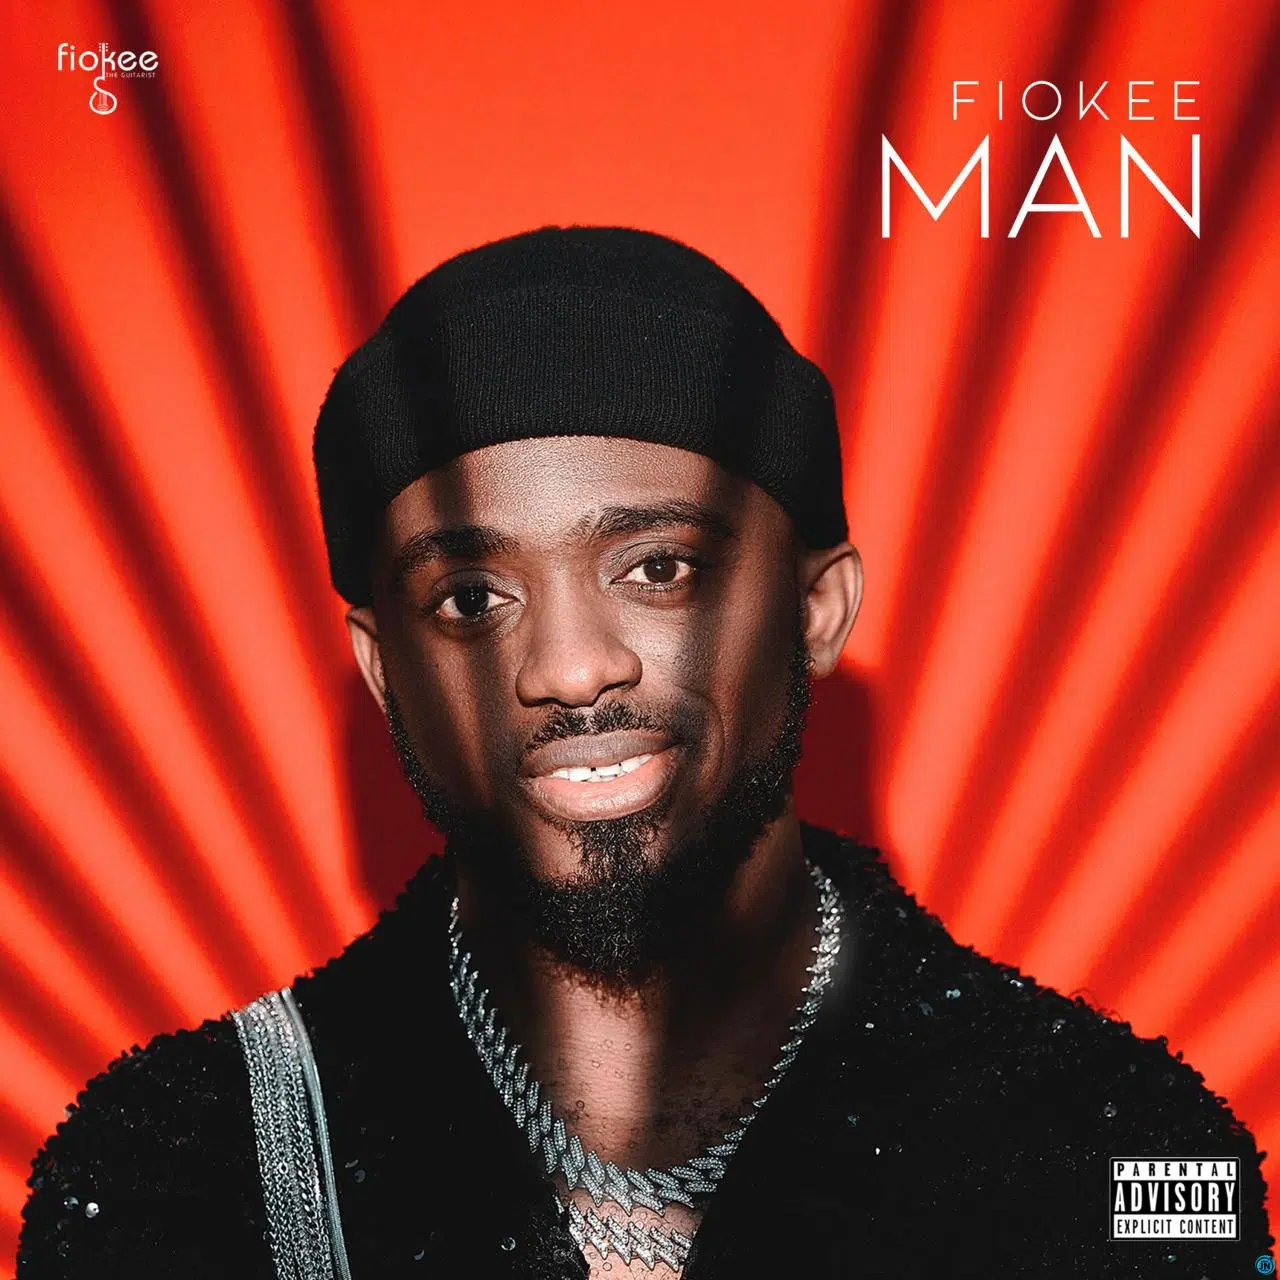 DOWNLOAD: Fiokee Ft. Ric Hassani & Klem – “Be a Man” Mp3